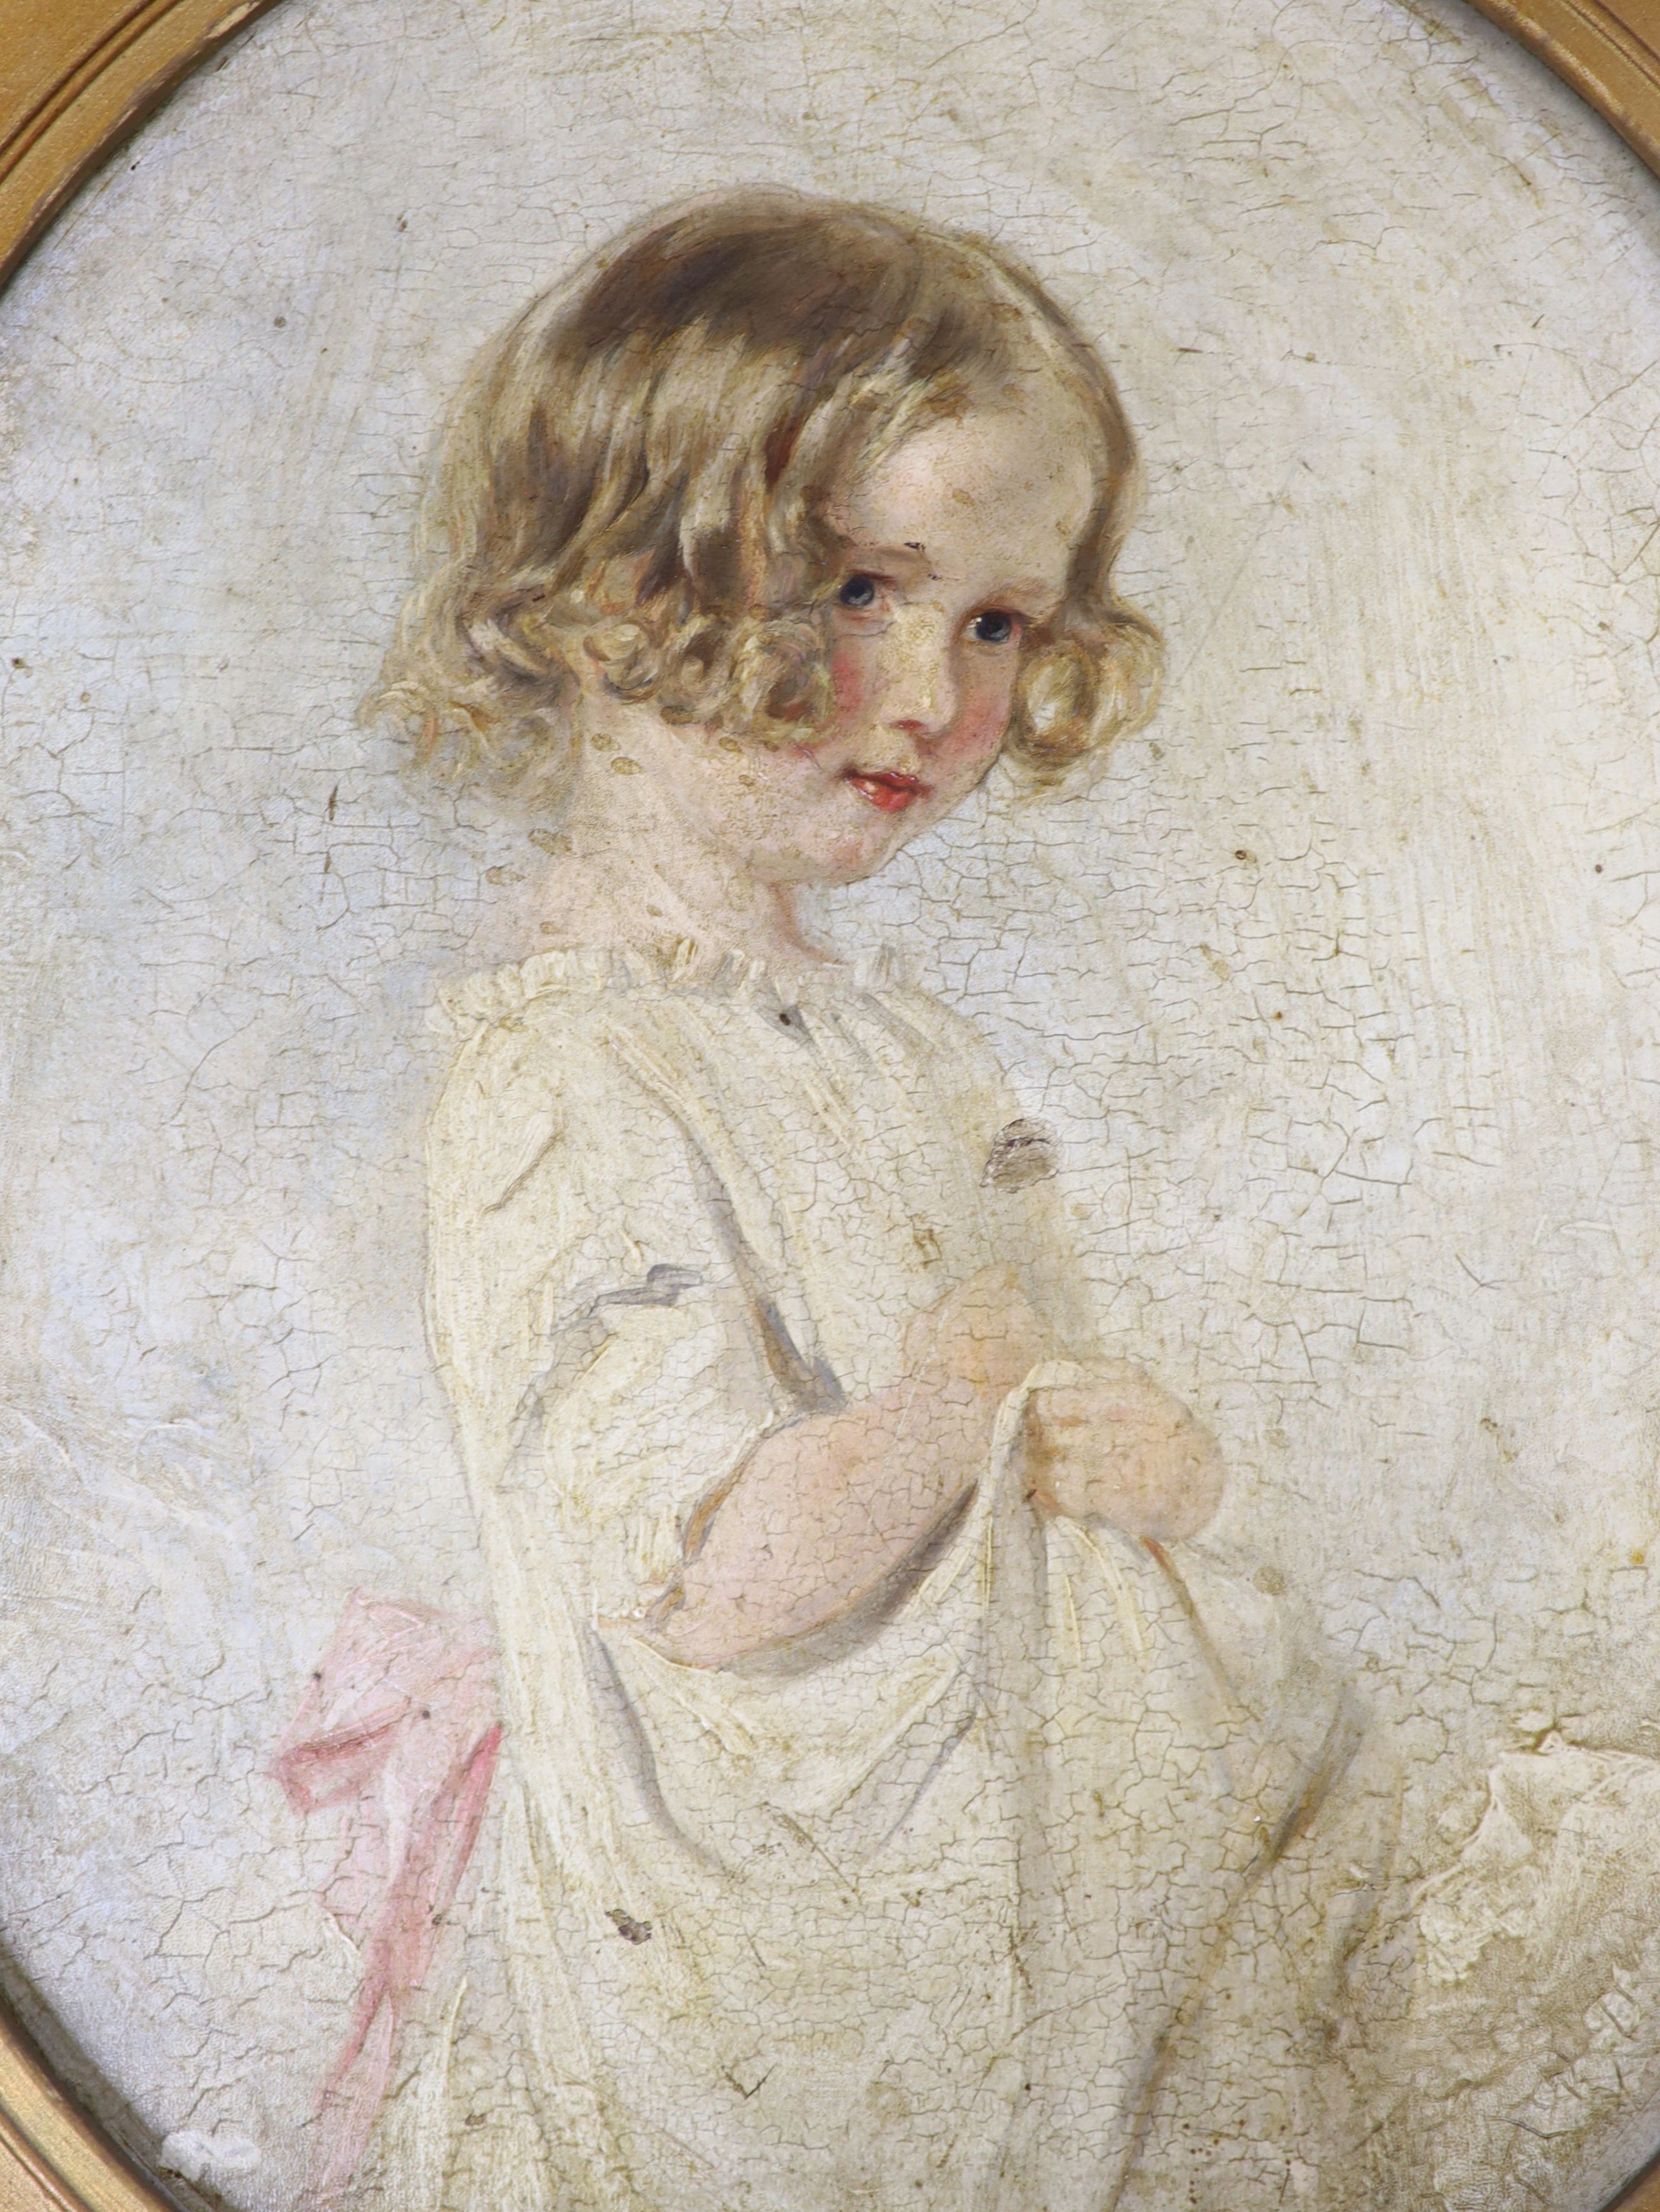 Early 20th century English School, oil on board, Portrait of a young girl, oval, 34 x 29cm